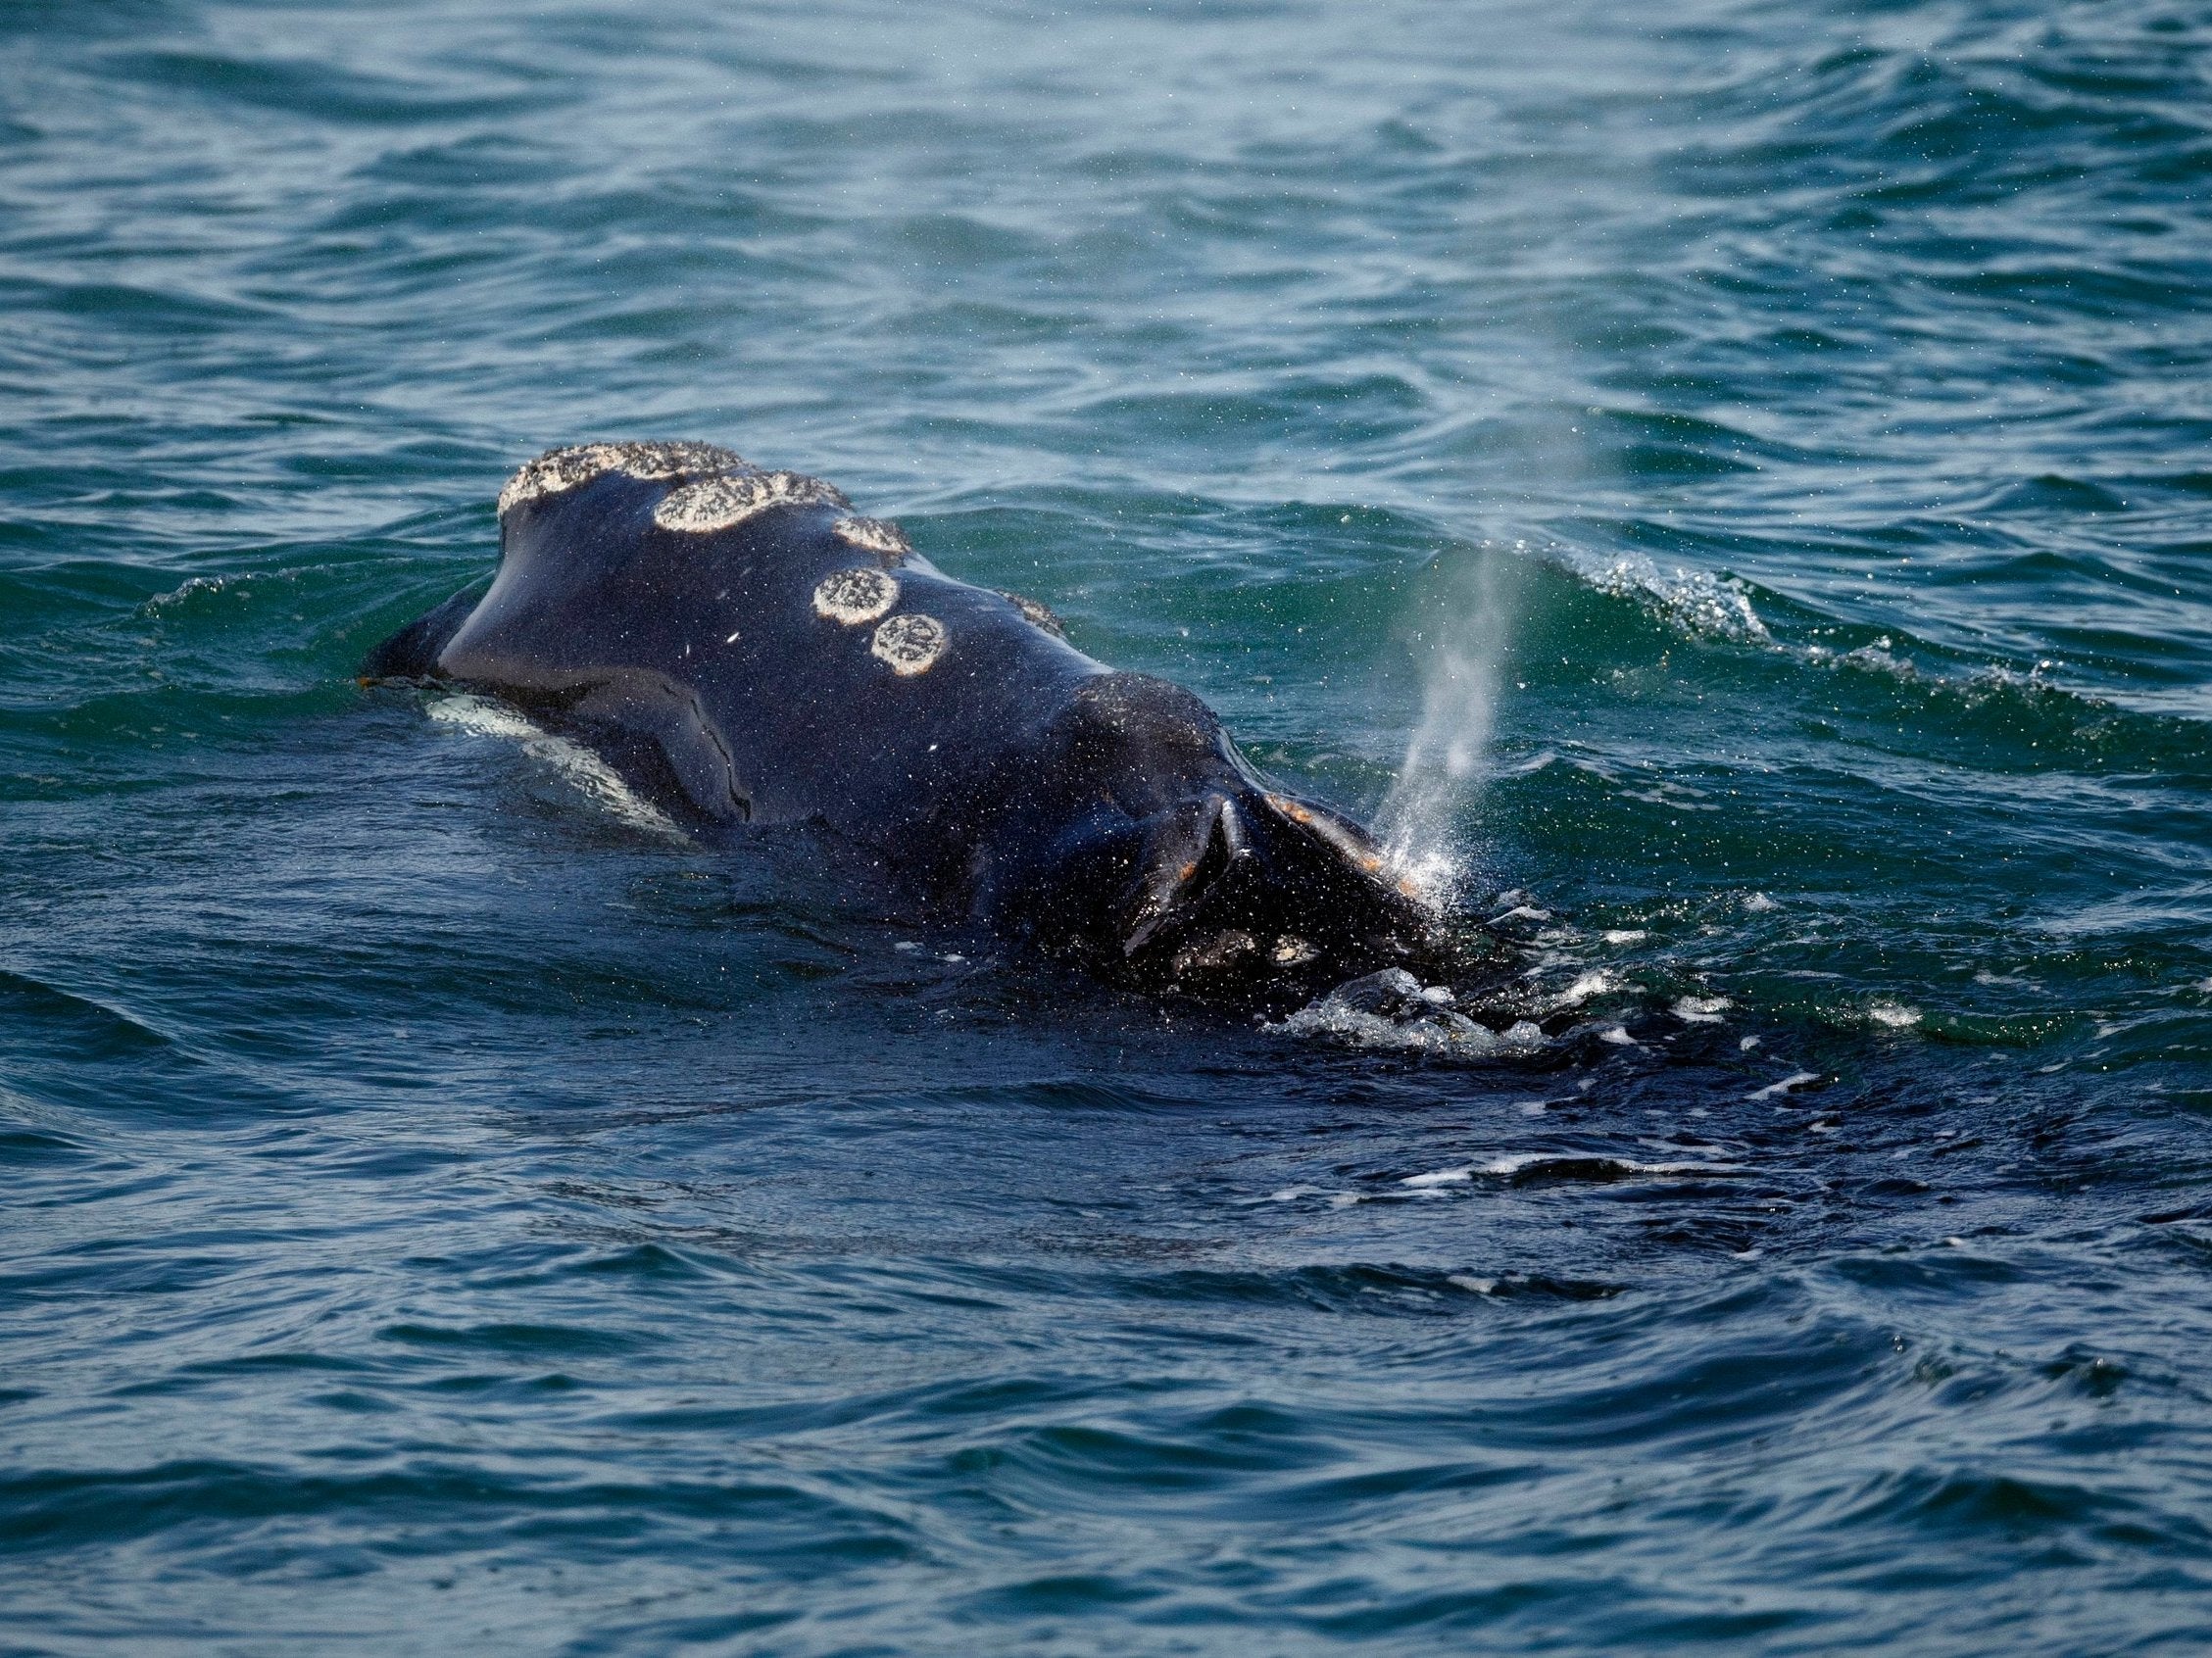 A North Atlantic right whale feeds off the coast of Plymouth, Massachusetts. It is thought only 400 of the endangered species remain in existence due to entanglements in fishing lines.